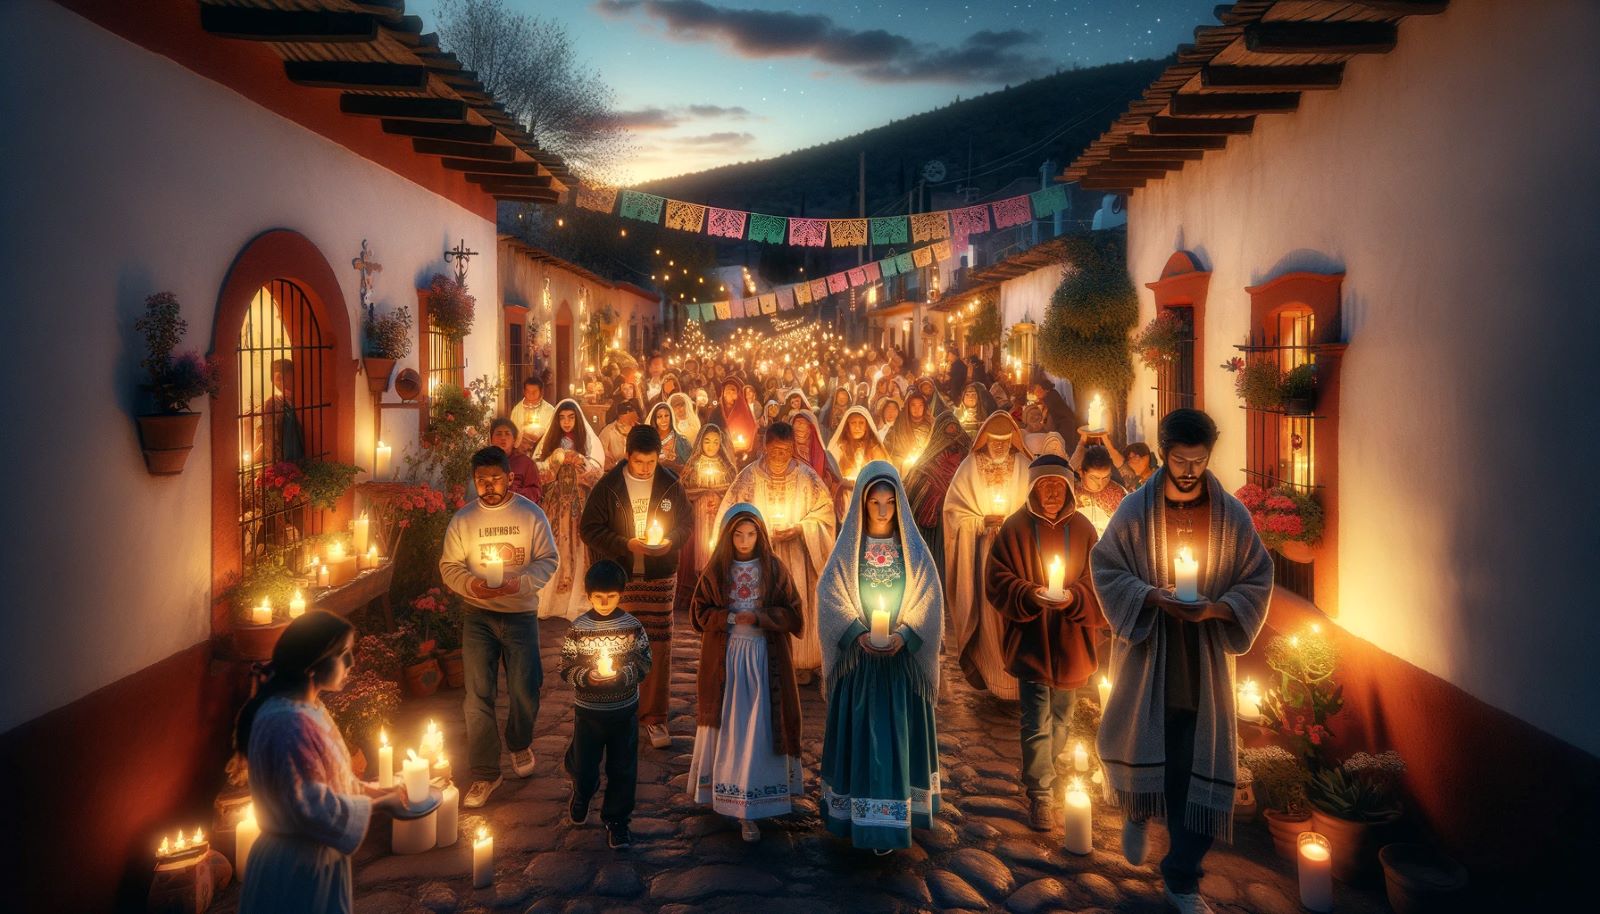 How Is Advent Celebrated In Mexico